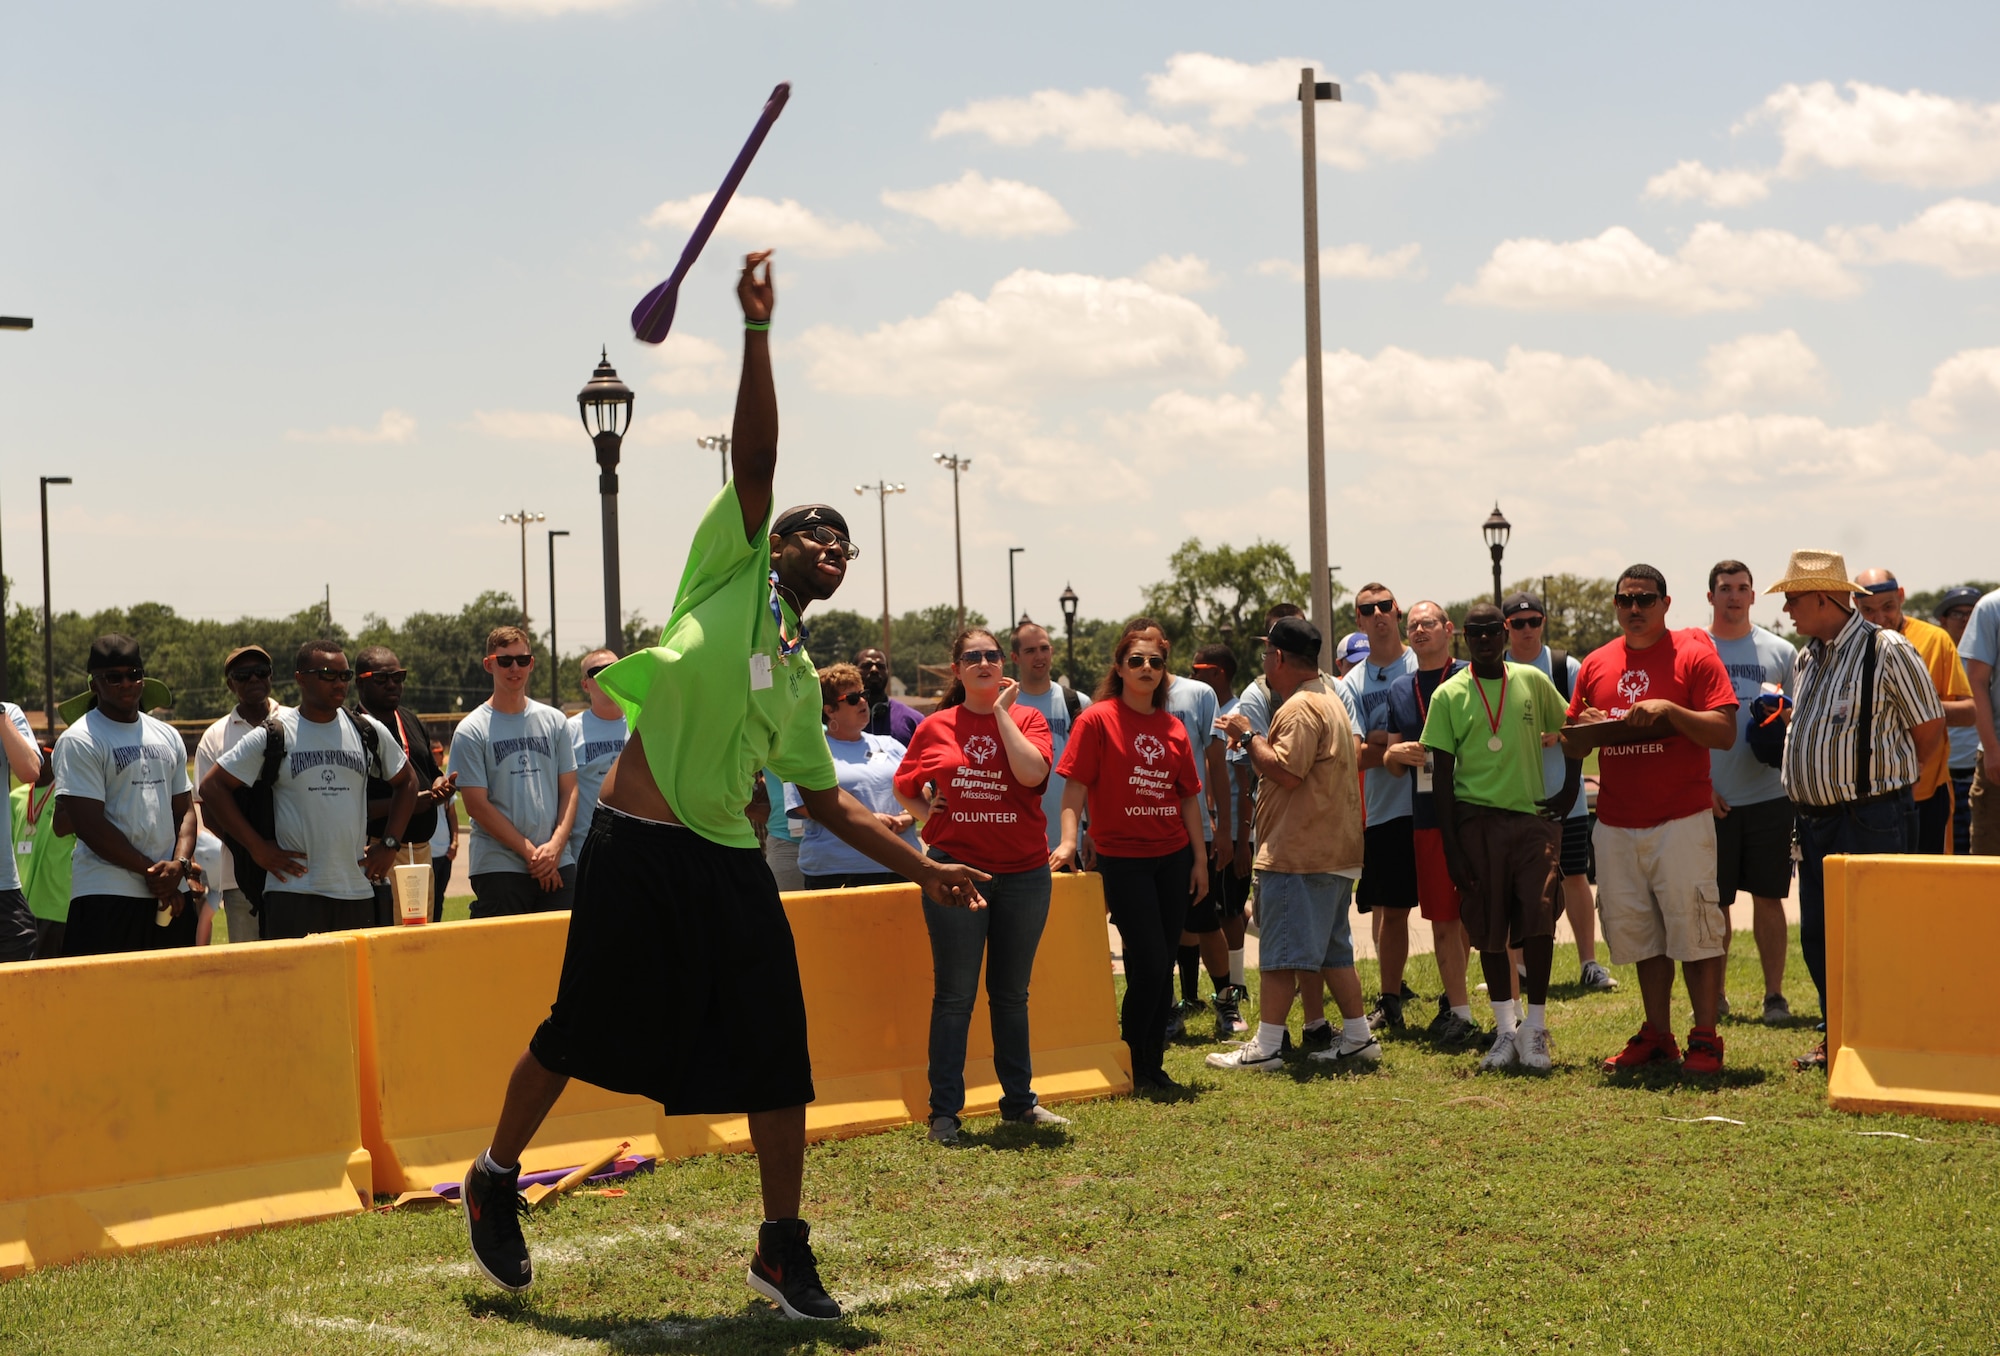 Stewart Stevens, Special Olympics athlete, throws a mini javelin during the Special Olympics Mississippi Summer Games at the triangle track May 21, 2016, Keesler Air Force Base, Miss. More than 700 athletes and 3,000 volunteers worked together to hold competitions throughout the day. This is the 30th year Keesler has hosted the state Special Olympics.  (U.S. Air Force photo by Kemberly Groue)